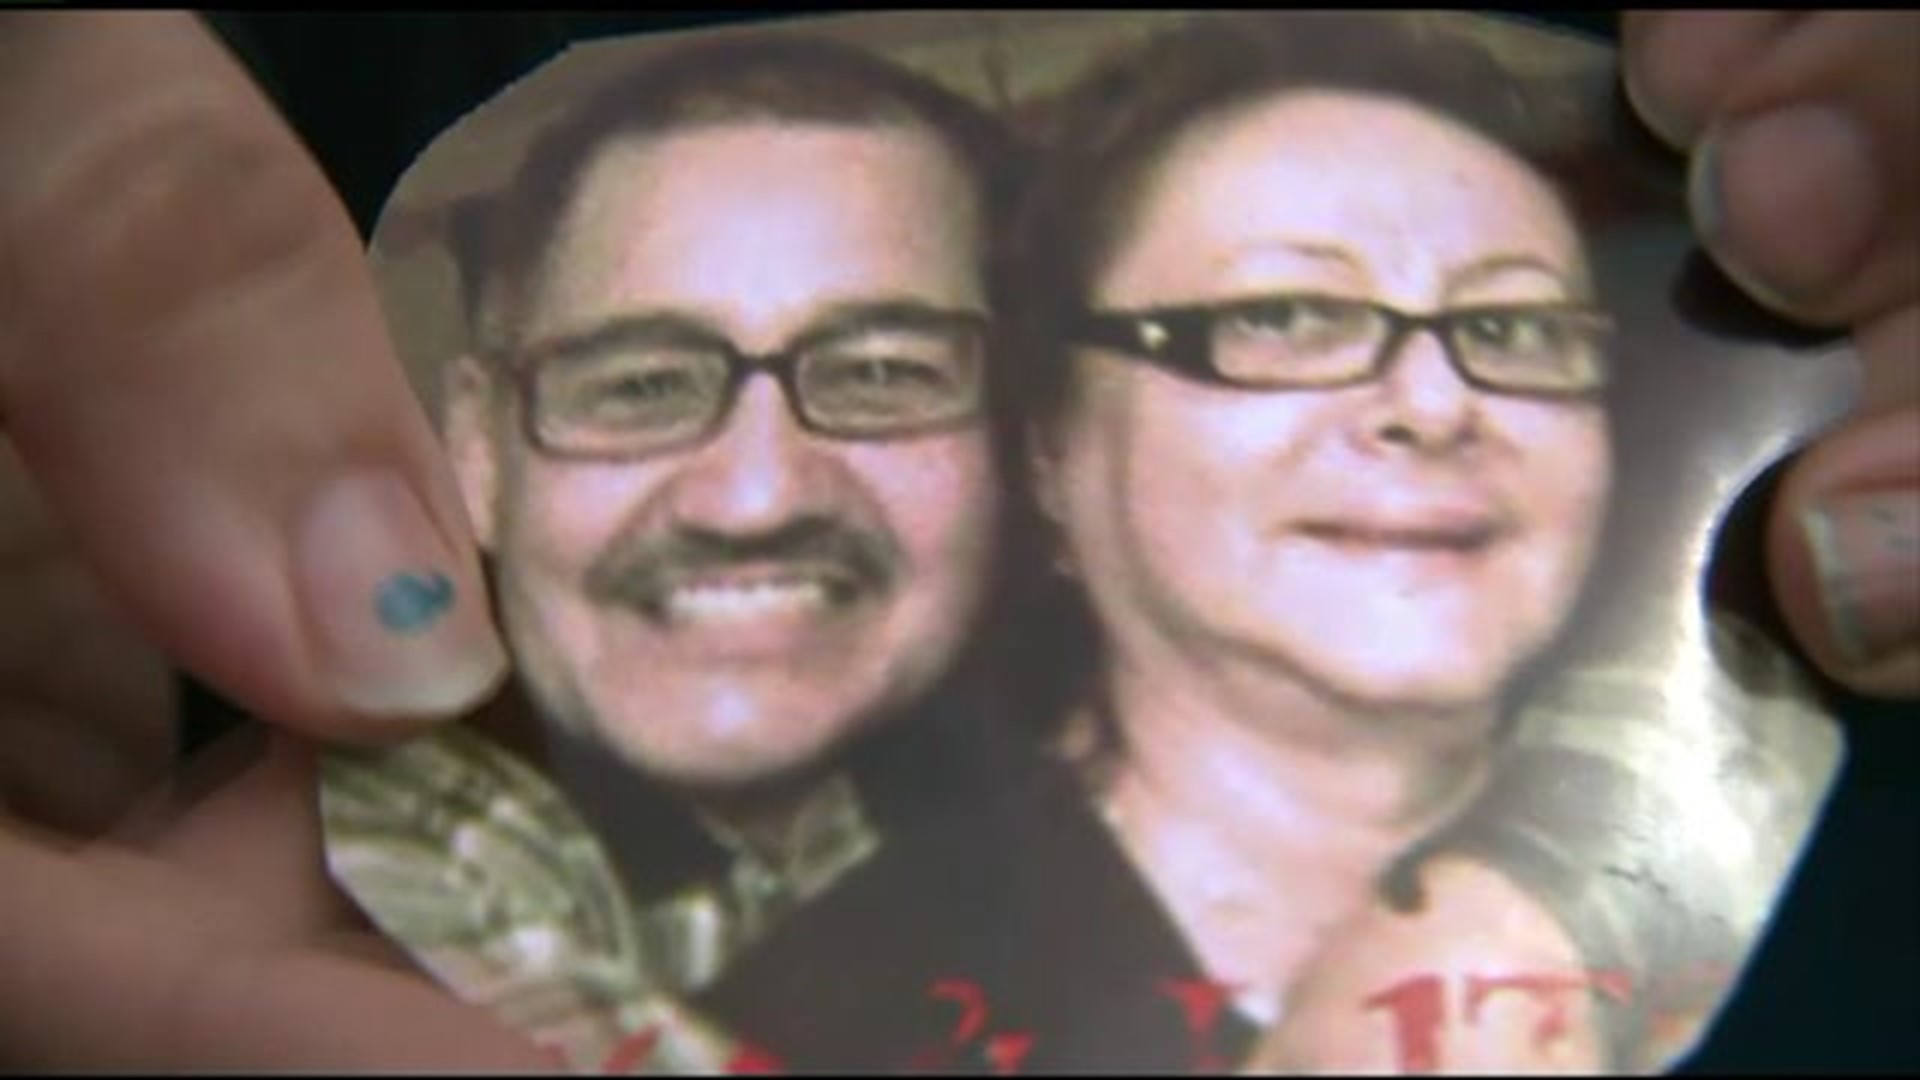 A family mourns the loss of their mother after hit-and-run